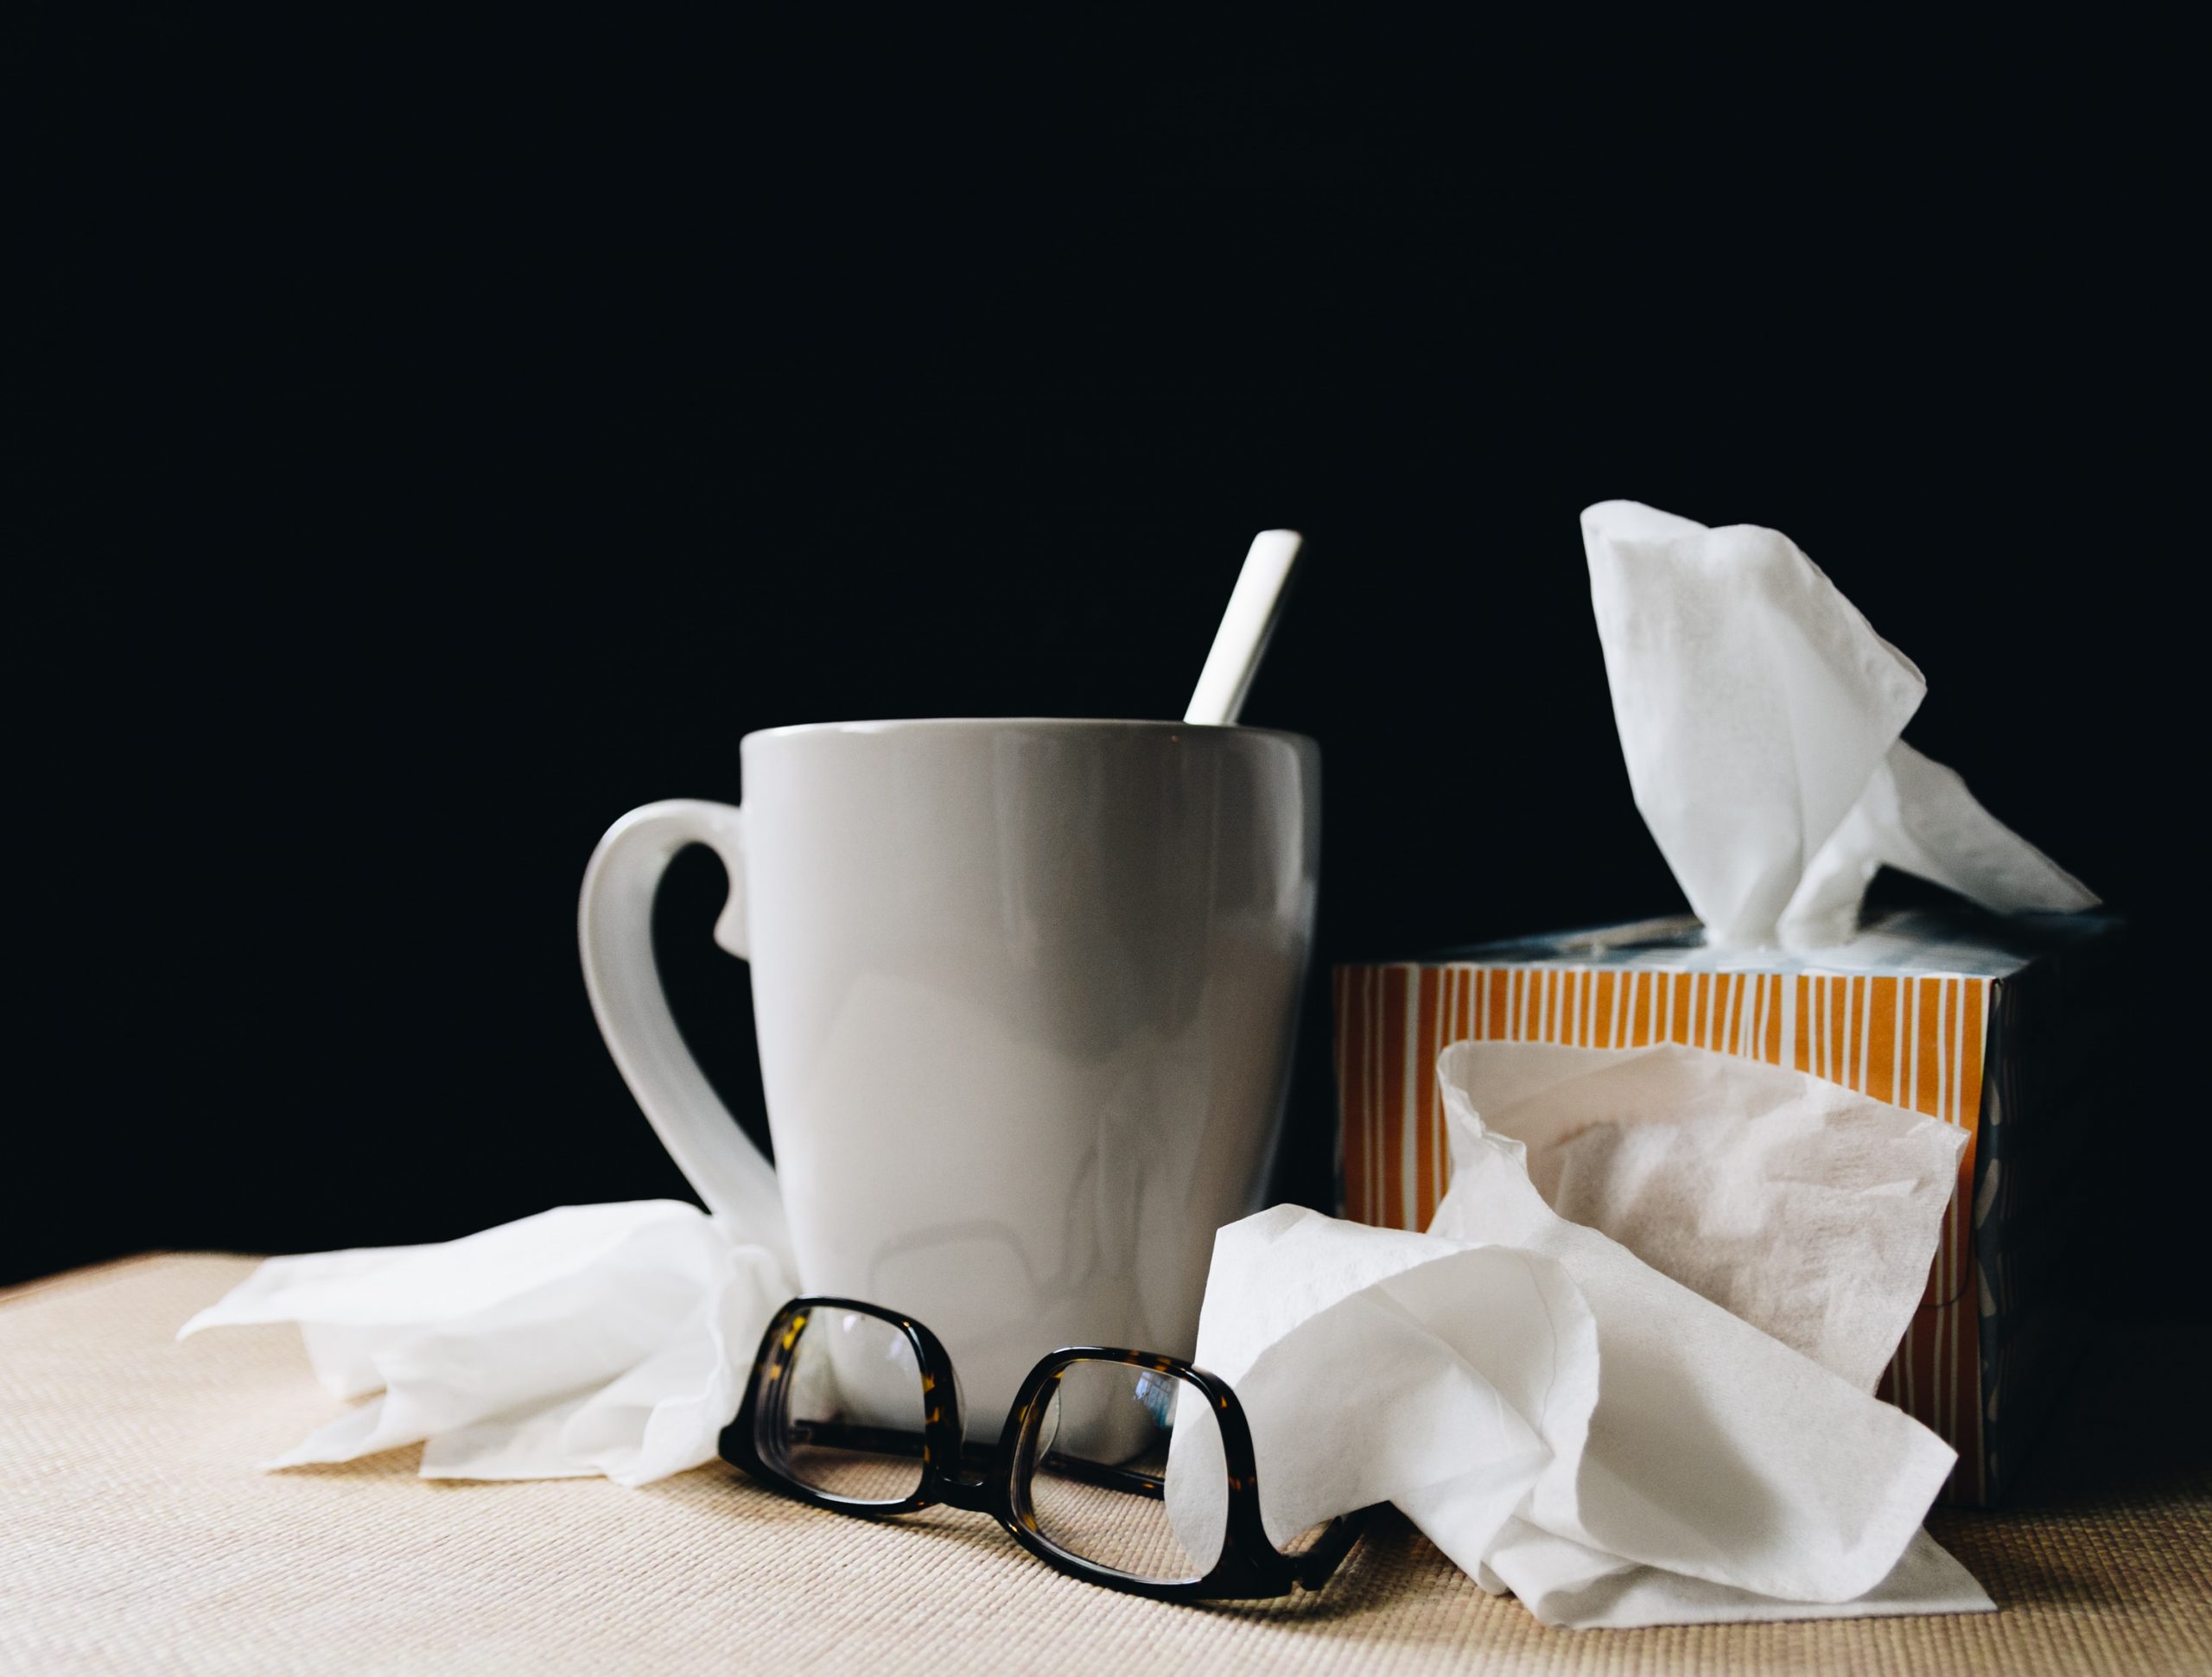 A box of tissues on atable next to a mug and a pair of glasses. Photo by kelly-sikkema on Unsplash.com